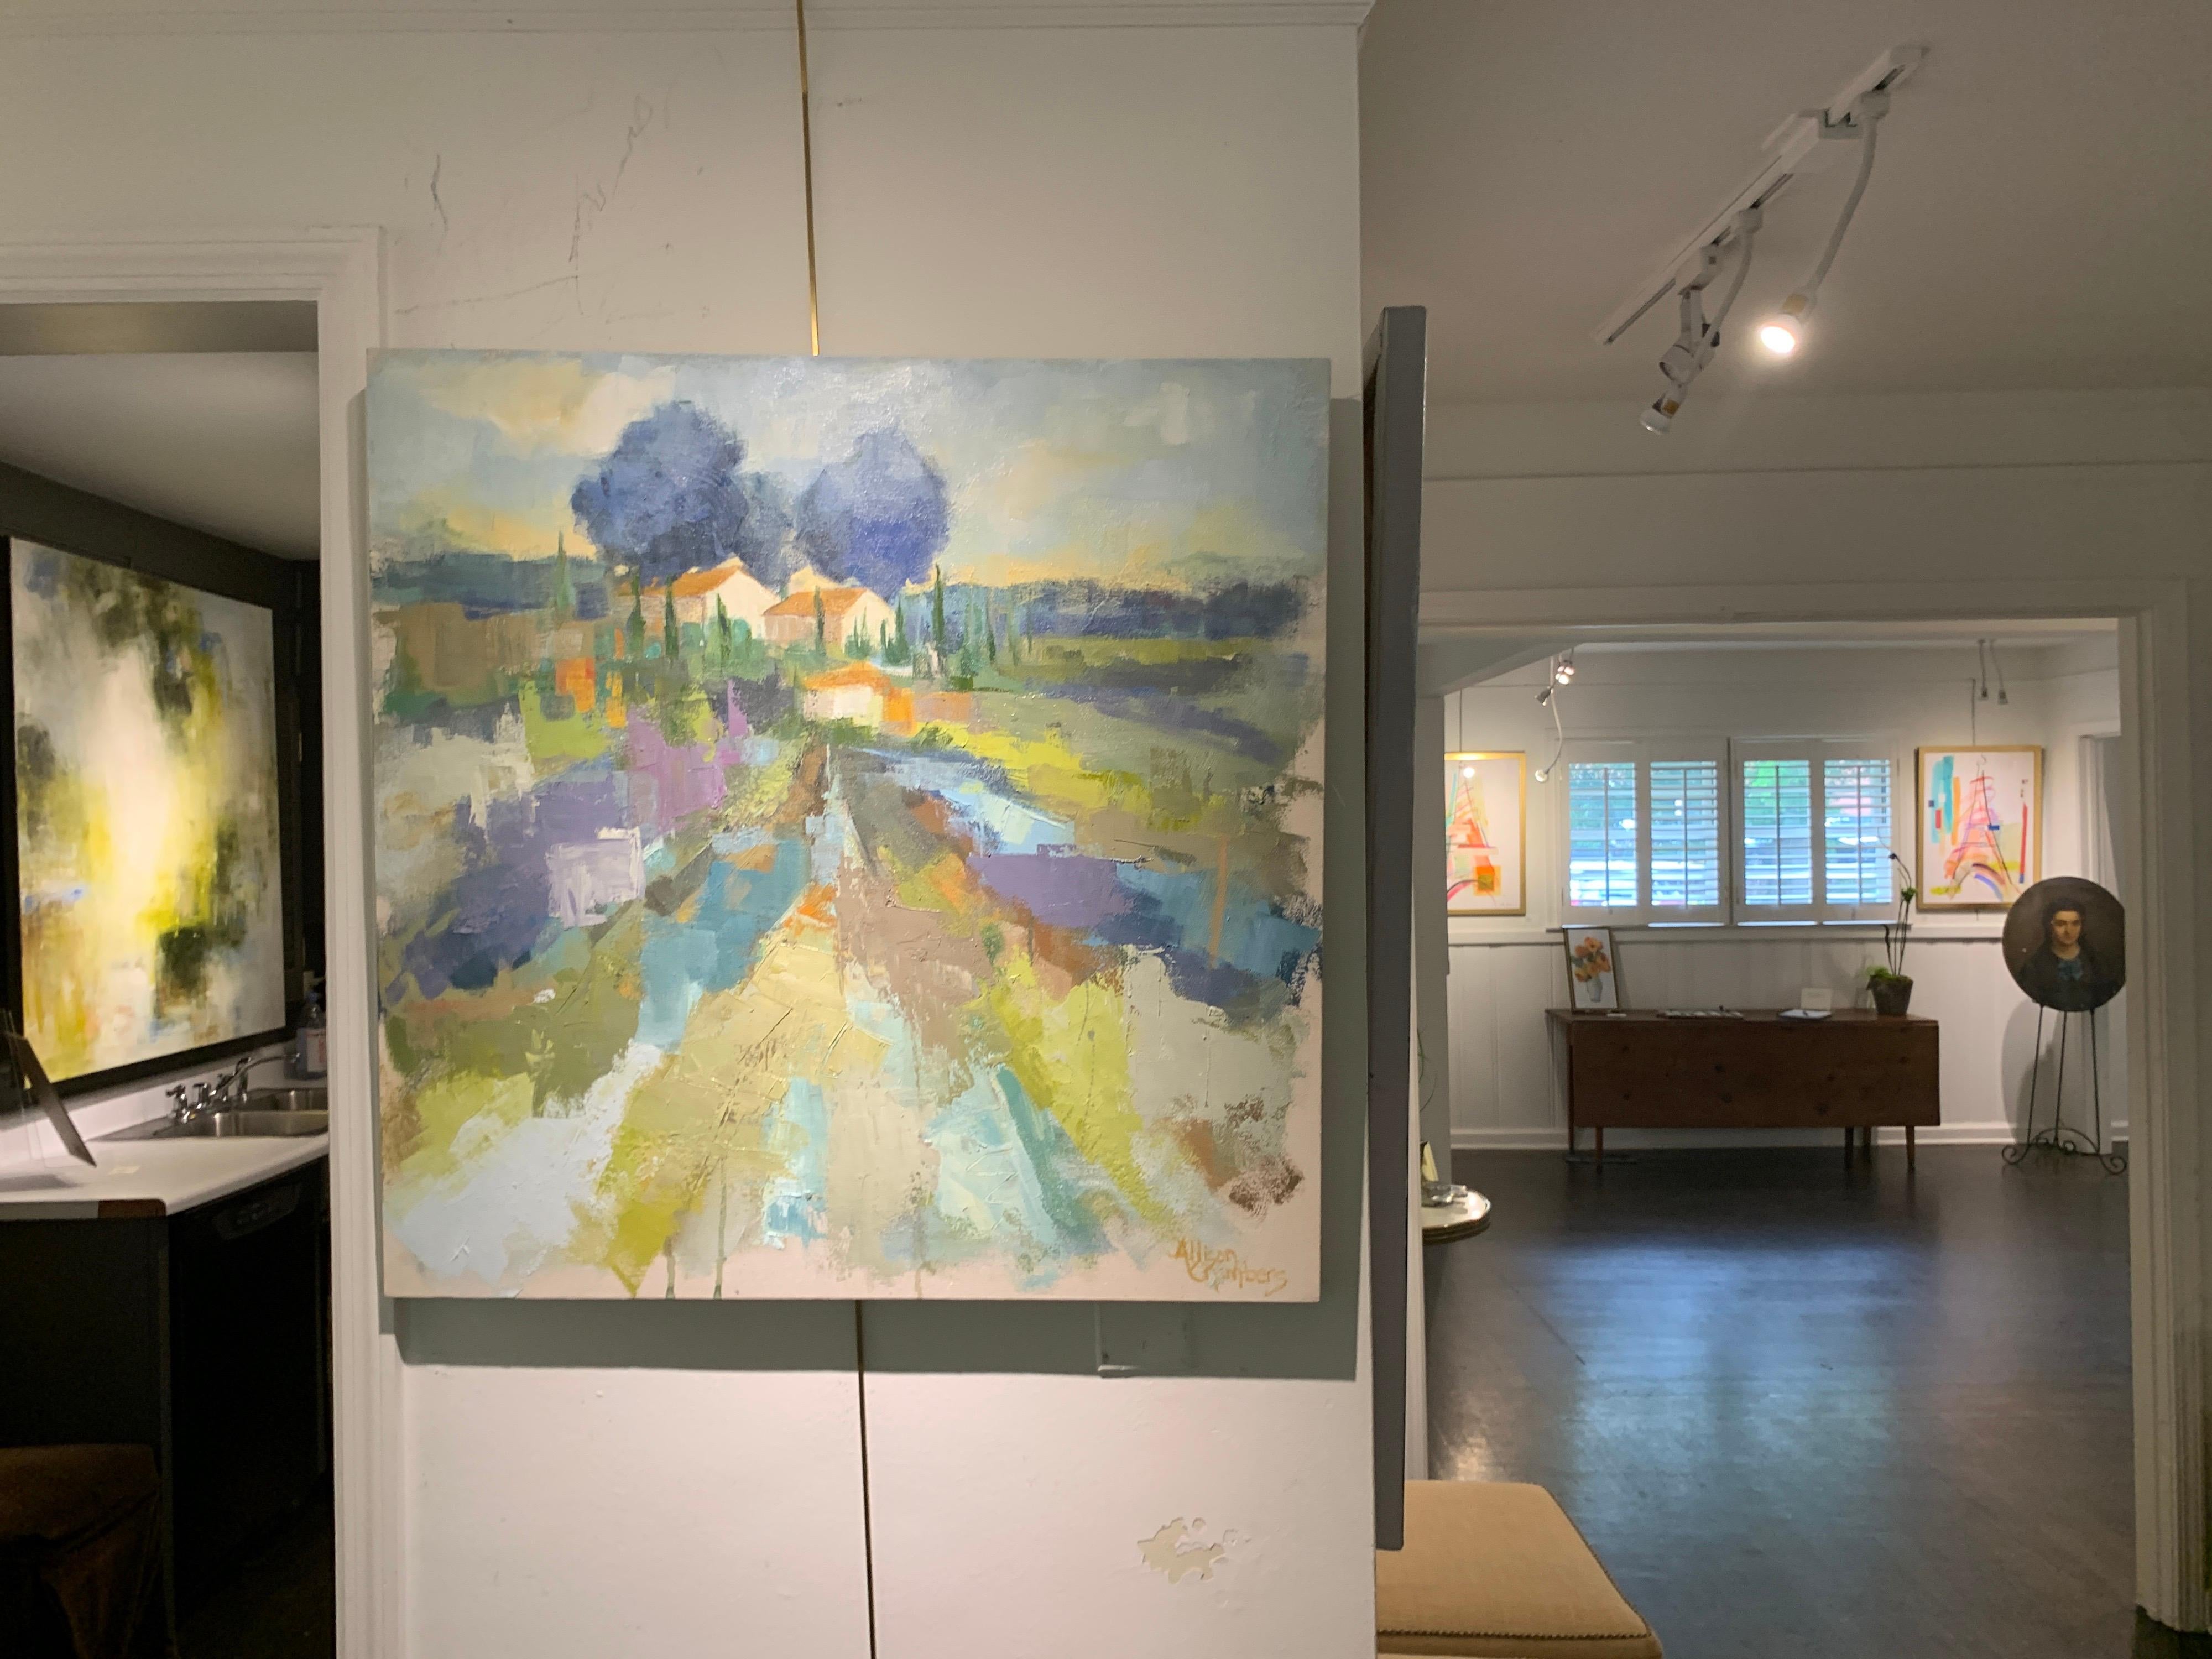 'Out of Nowhere' is an oil on canvas Impressionist landscape painting of square format created by American artist Allison Chambers in 2021. Featuring a palette made of green, grey and beige blue, the painting depicts an exquisite south of France